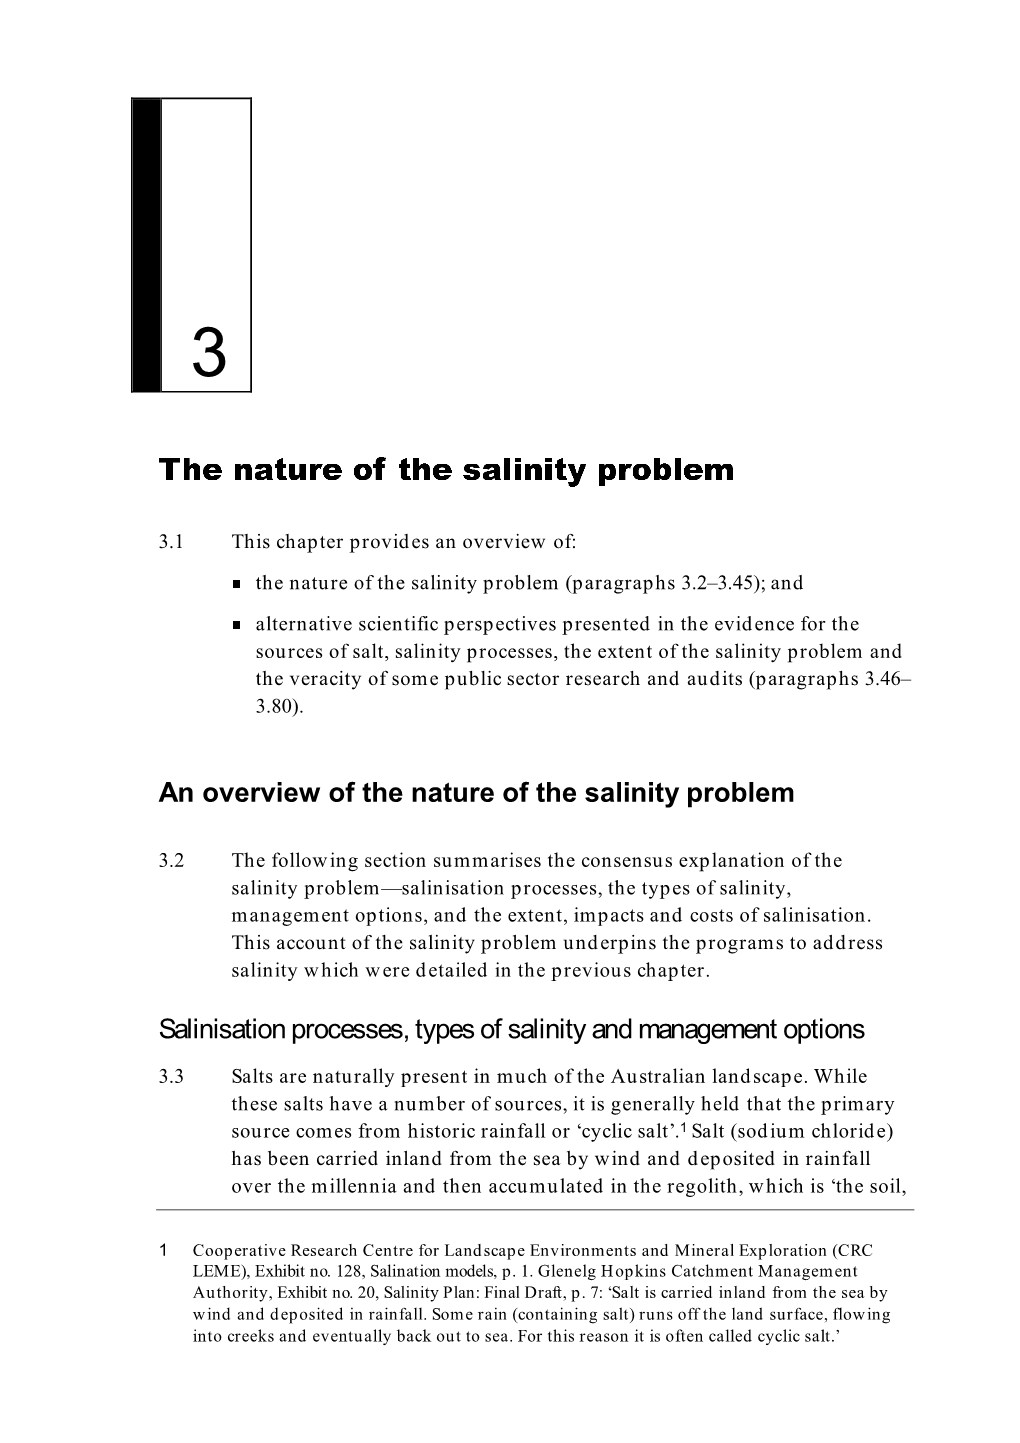 The Nature of the Salinity Problem